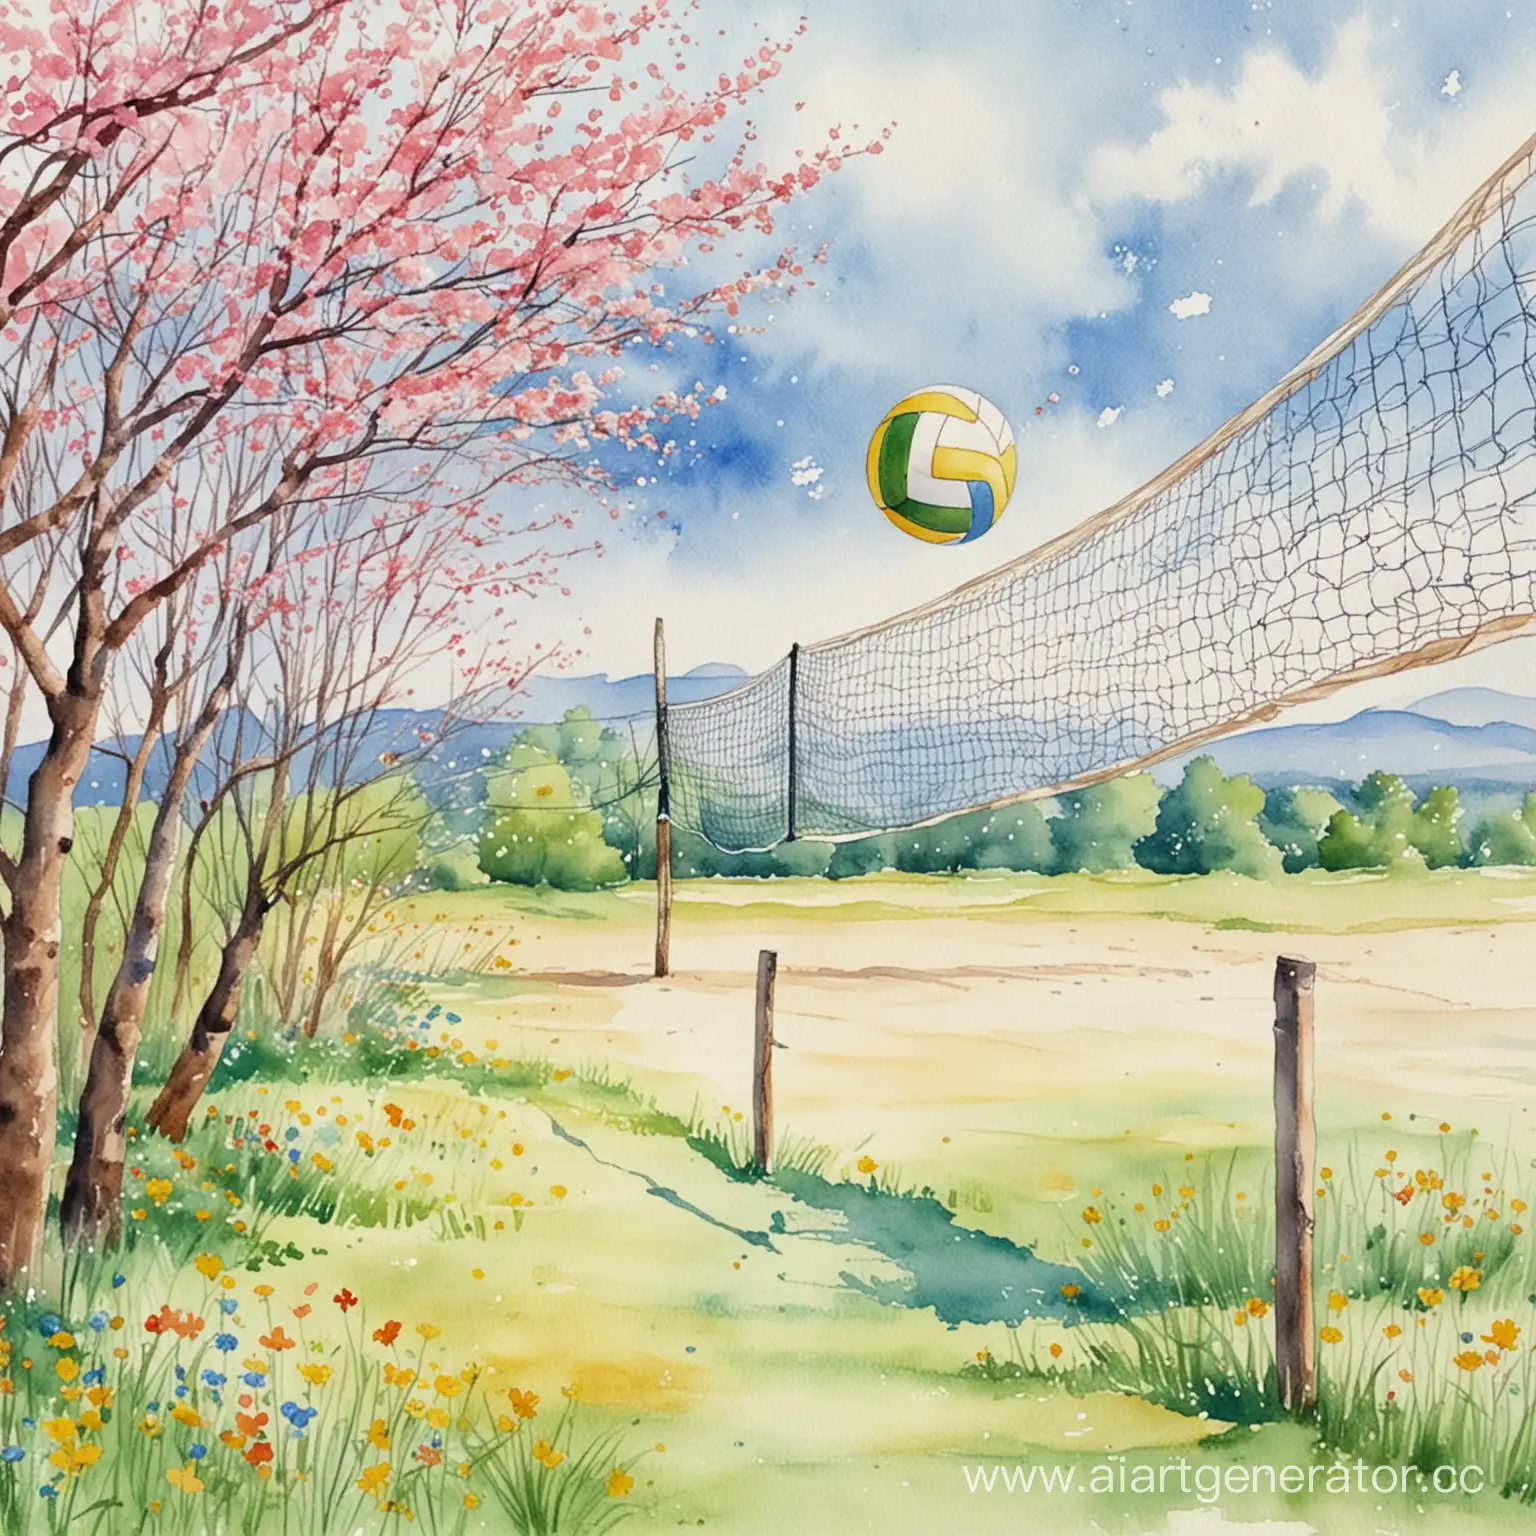 Vibrant-Watercolor-Illustration-Sunny-Day-Volleyball-Match-in-Nature